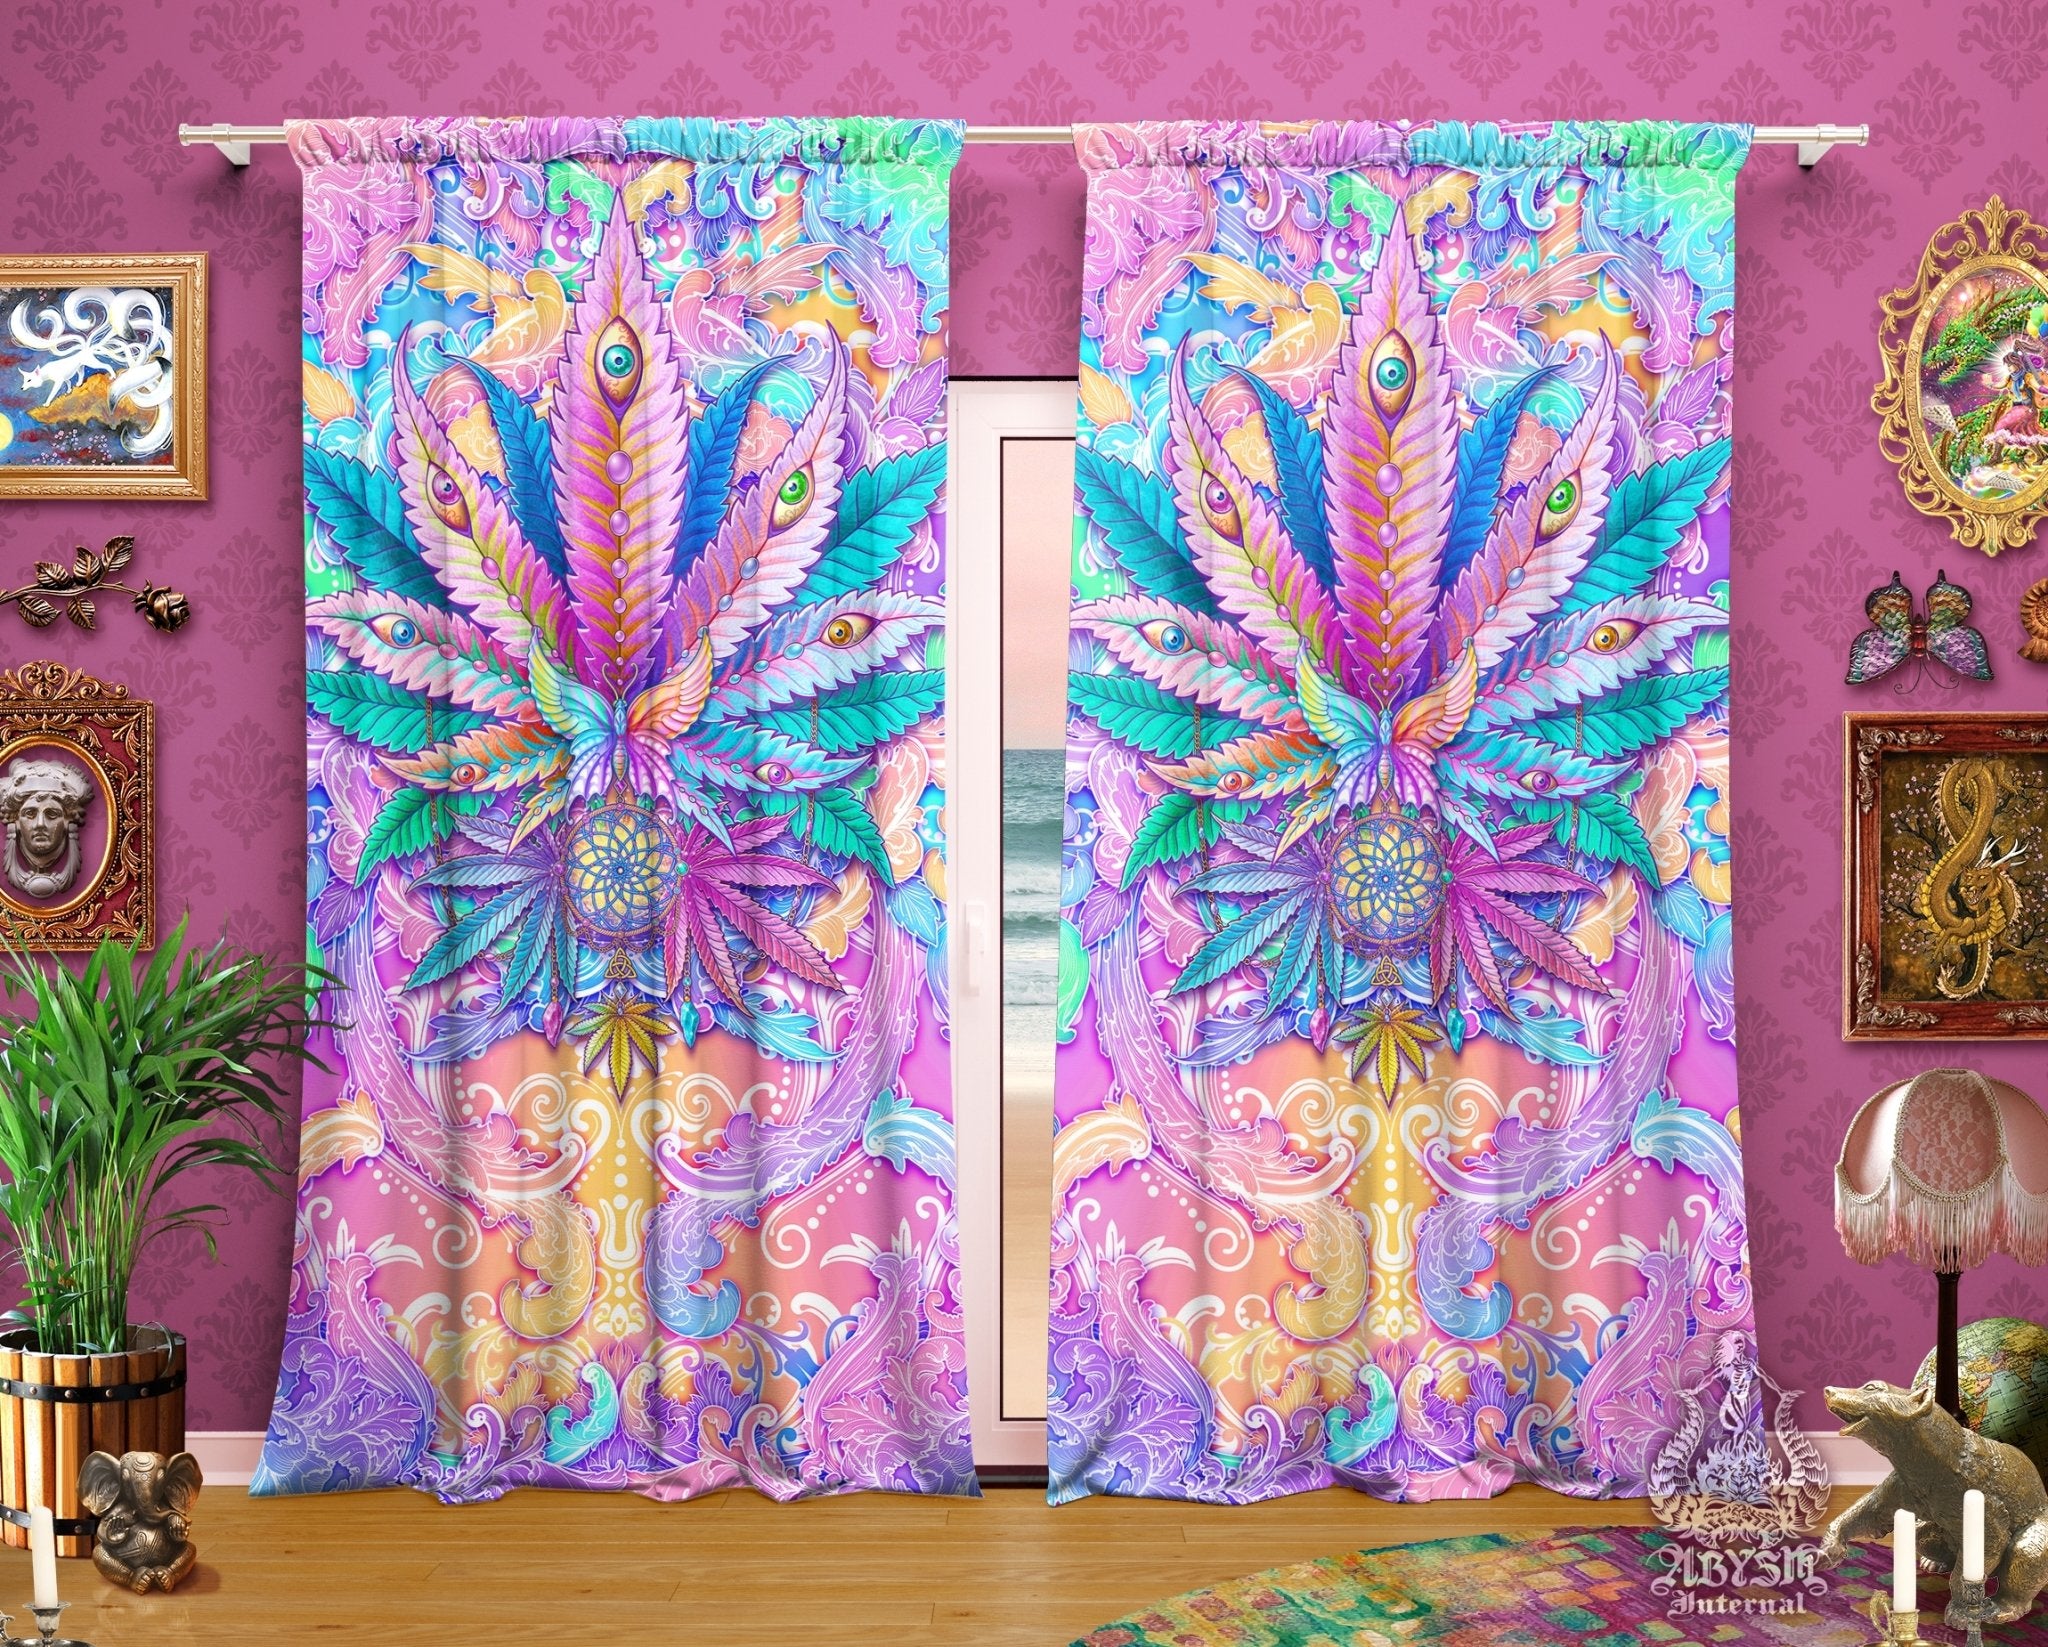 Weed Blackout Curtains, Cannabis Home and Shop Decor, Long Window Panels, Pastel and Aesthetic Print, Girly 420 Room Art - Abysm Internal